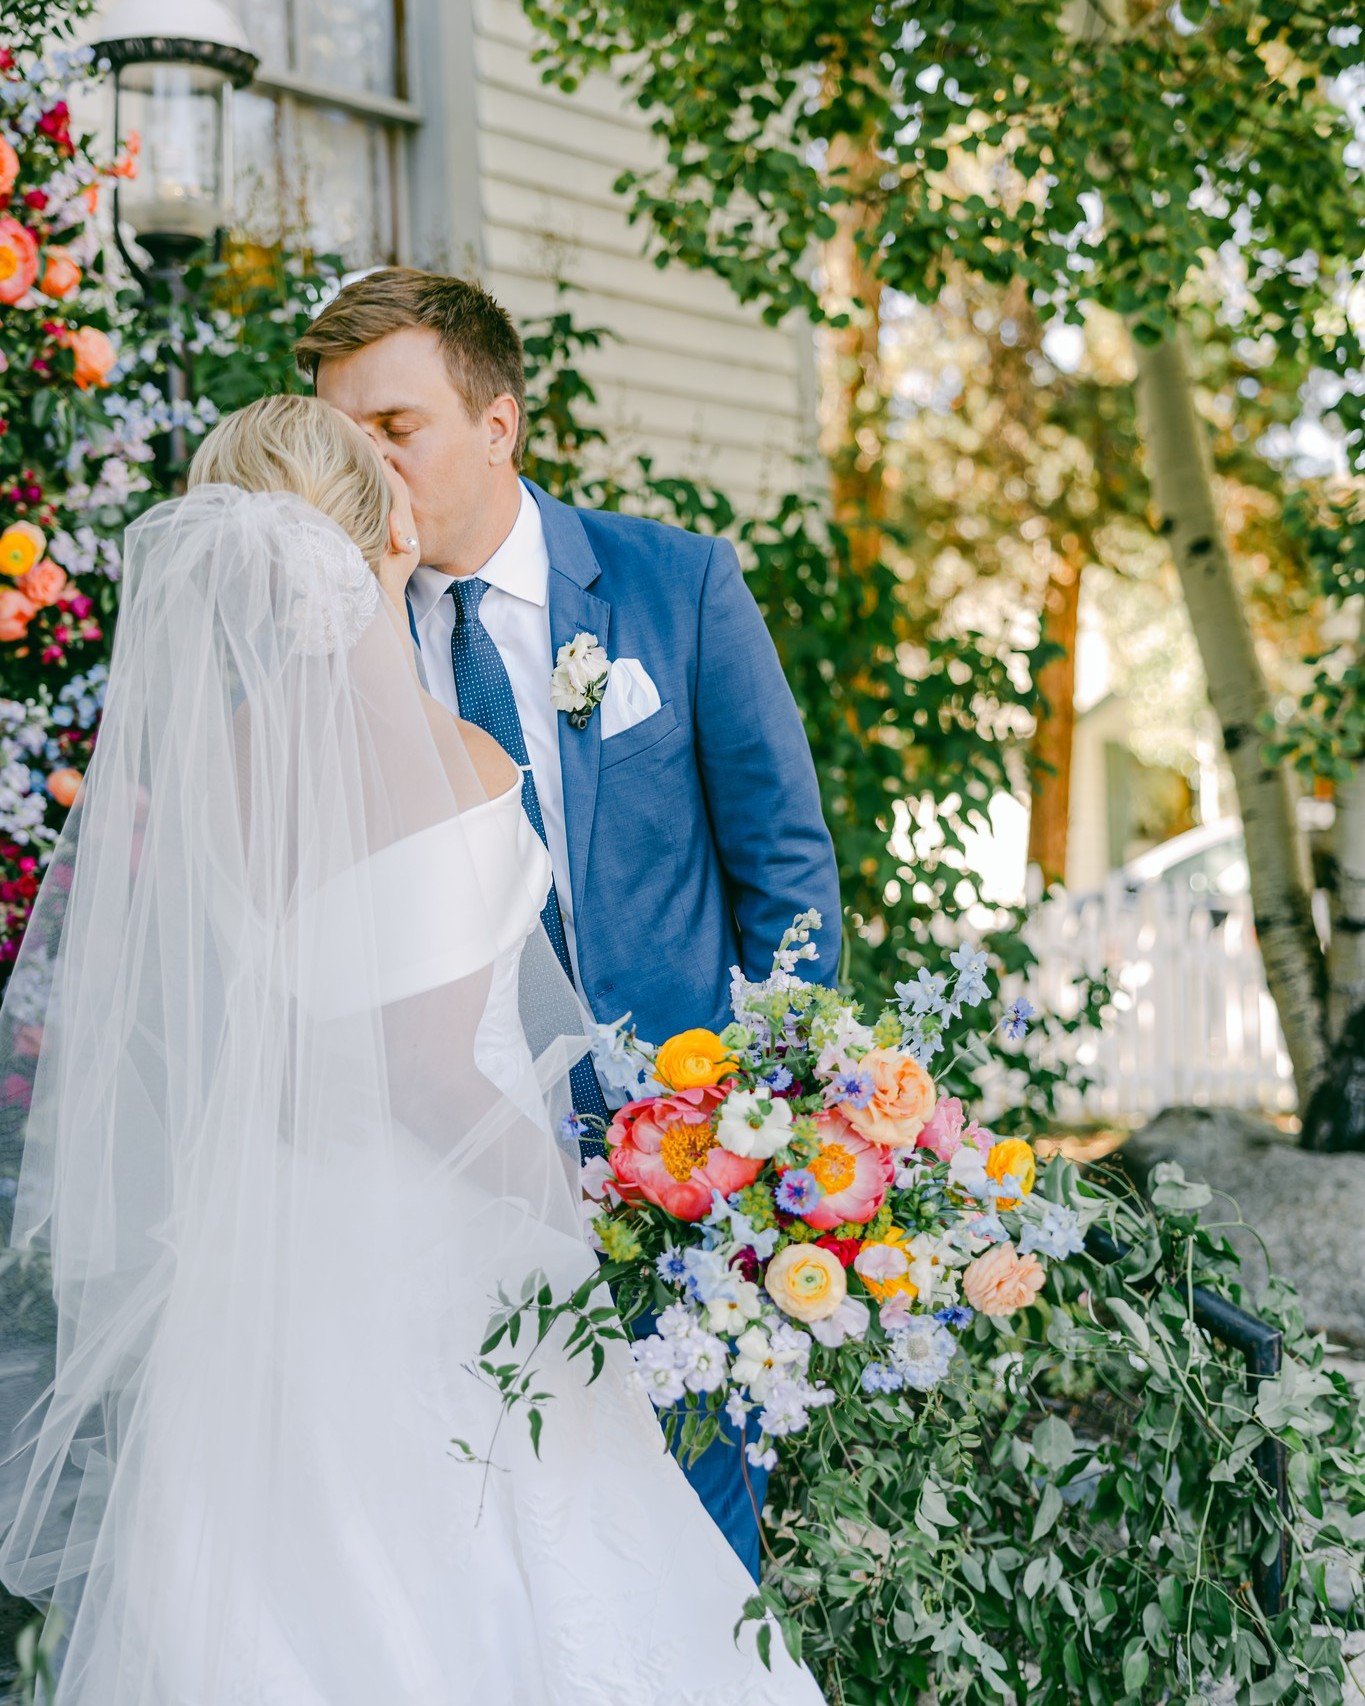 Planning your big day? Don't wilt under pressure&mdash;our wedding flowers are here to make your celebration blossom. From bouquets to boutonnieres, we've got your happily ever after covered. 

📸 @laurafoote
✨ @jess_pinkcevents
📍#skitiplodge @vailr